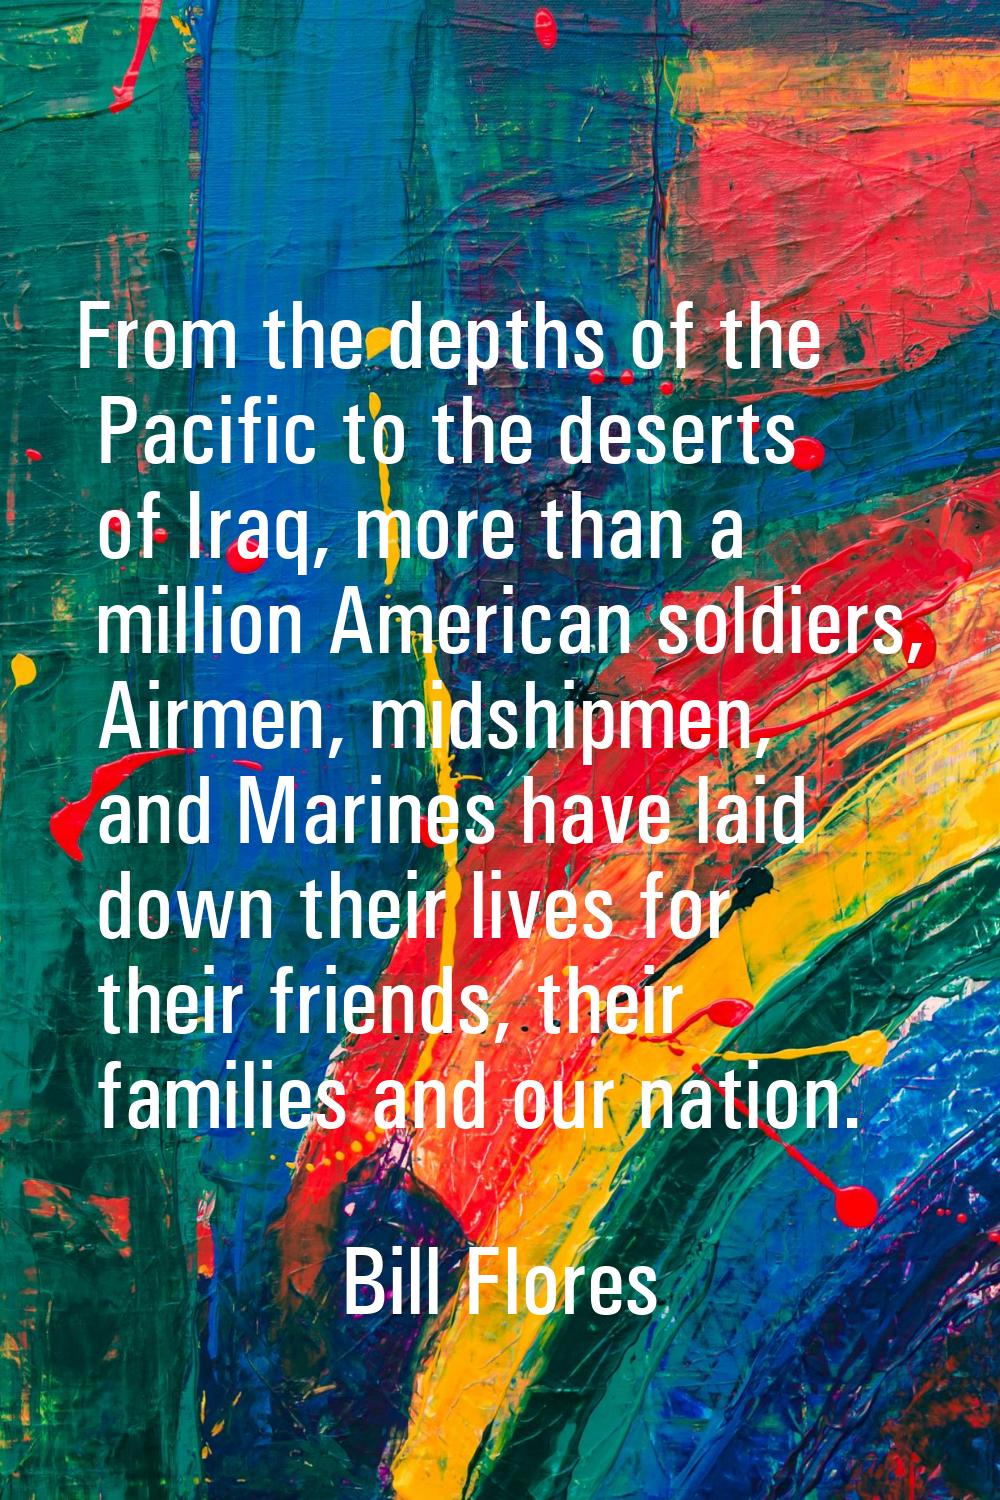 From the depths of the Pacific to the deserts of Iraq, more than a million American soldiers, Airme